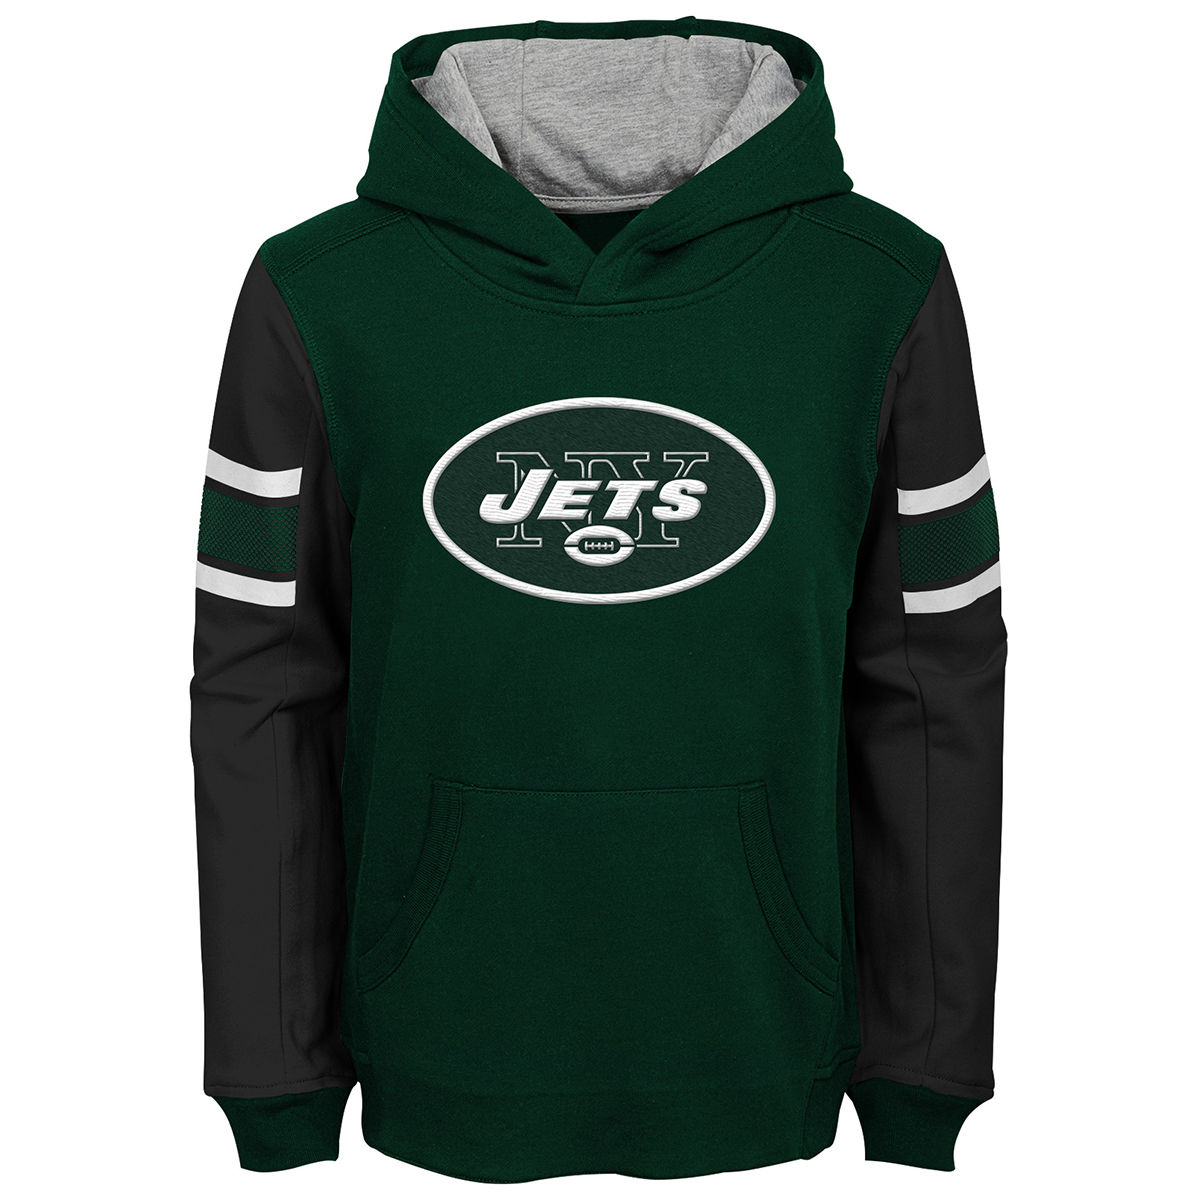 New York Jets Big Boys' Man In Motion Color-Blocked Pullover Hoodie - Green, XL